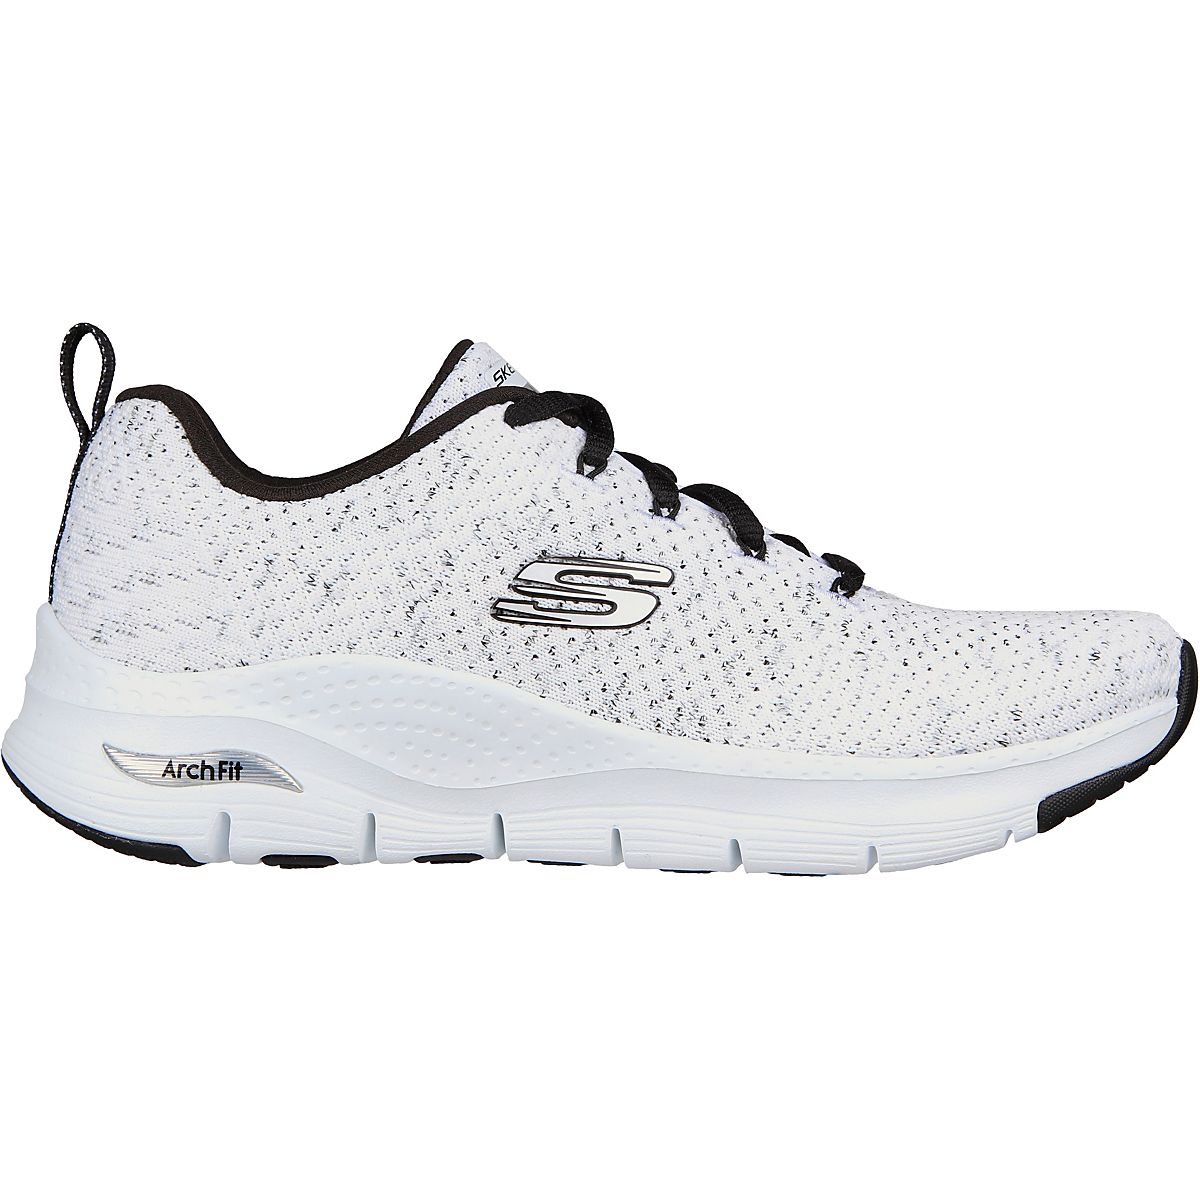 Skechers Women's Arch Fit Shoes | Free Shipping at Academy